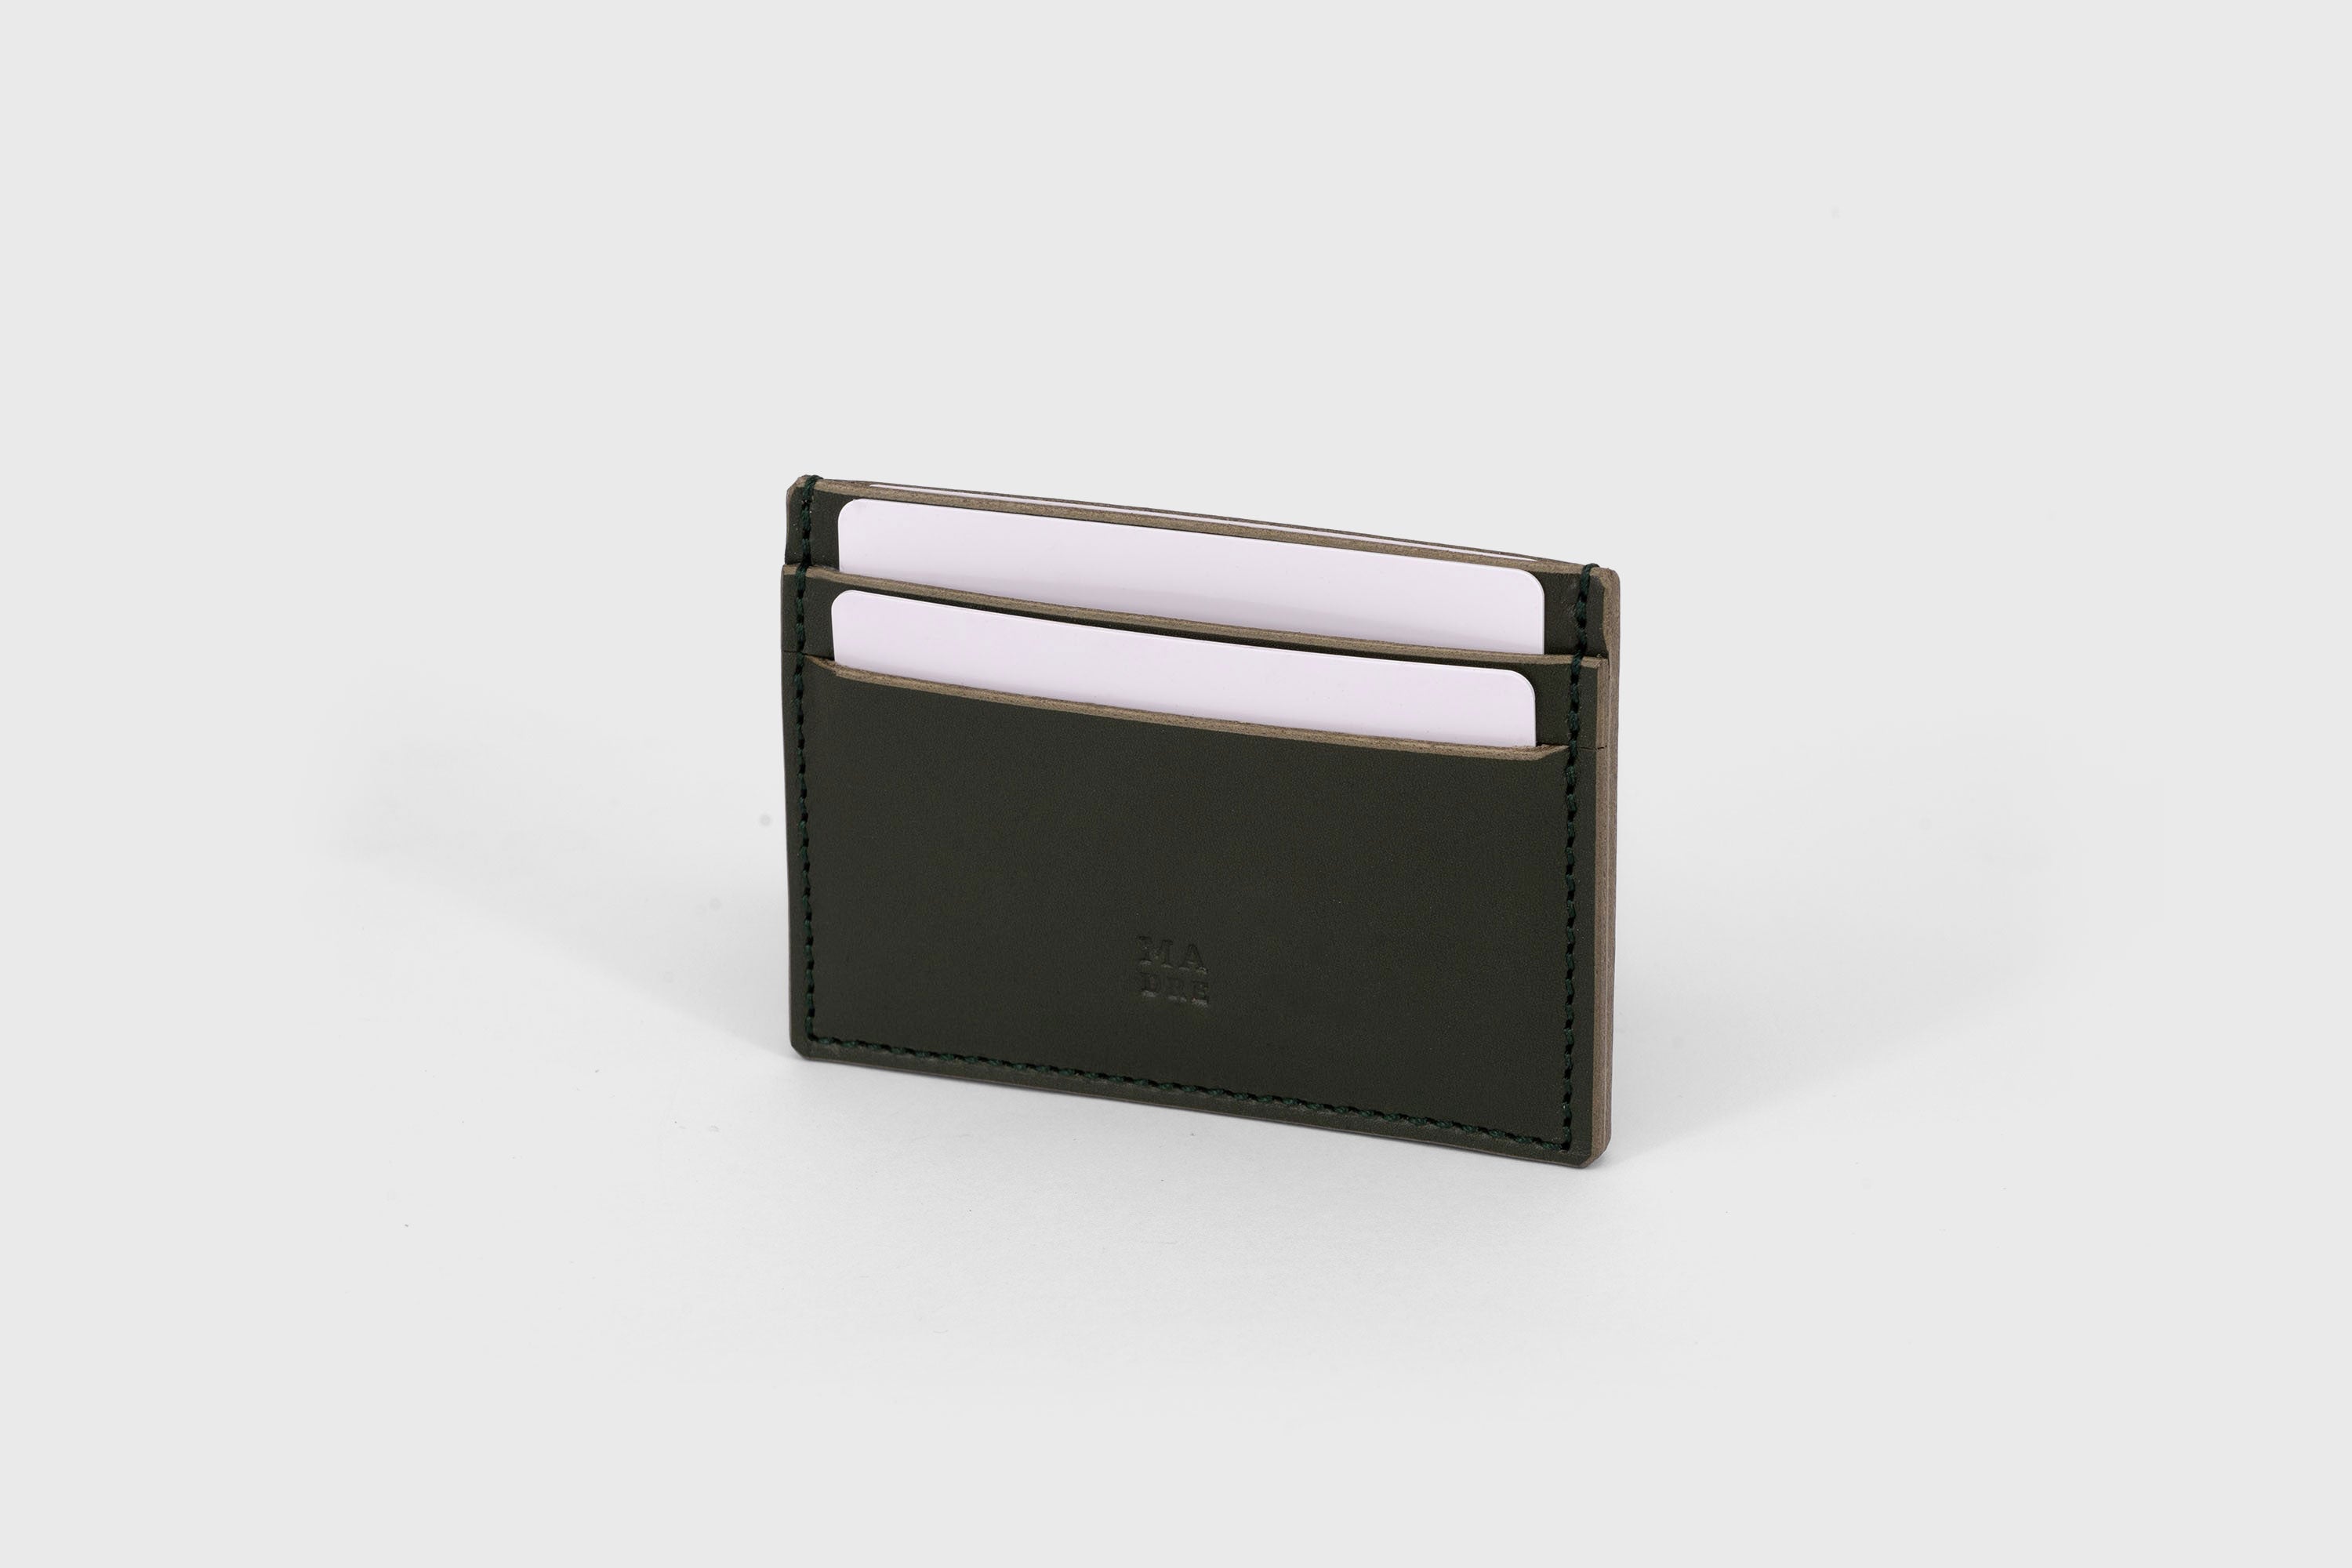 Credit Card Wallet Minimalist in Olive Green Leather Vachetta Vegetable Tanned Leather Handmade and Design by Atelier Madre Manuel Dreesmann Barcelona Spain